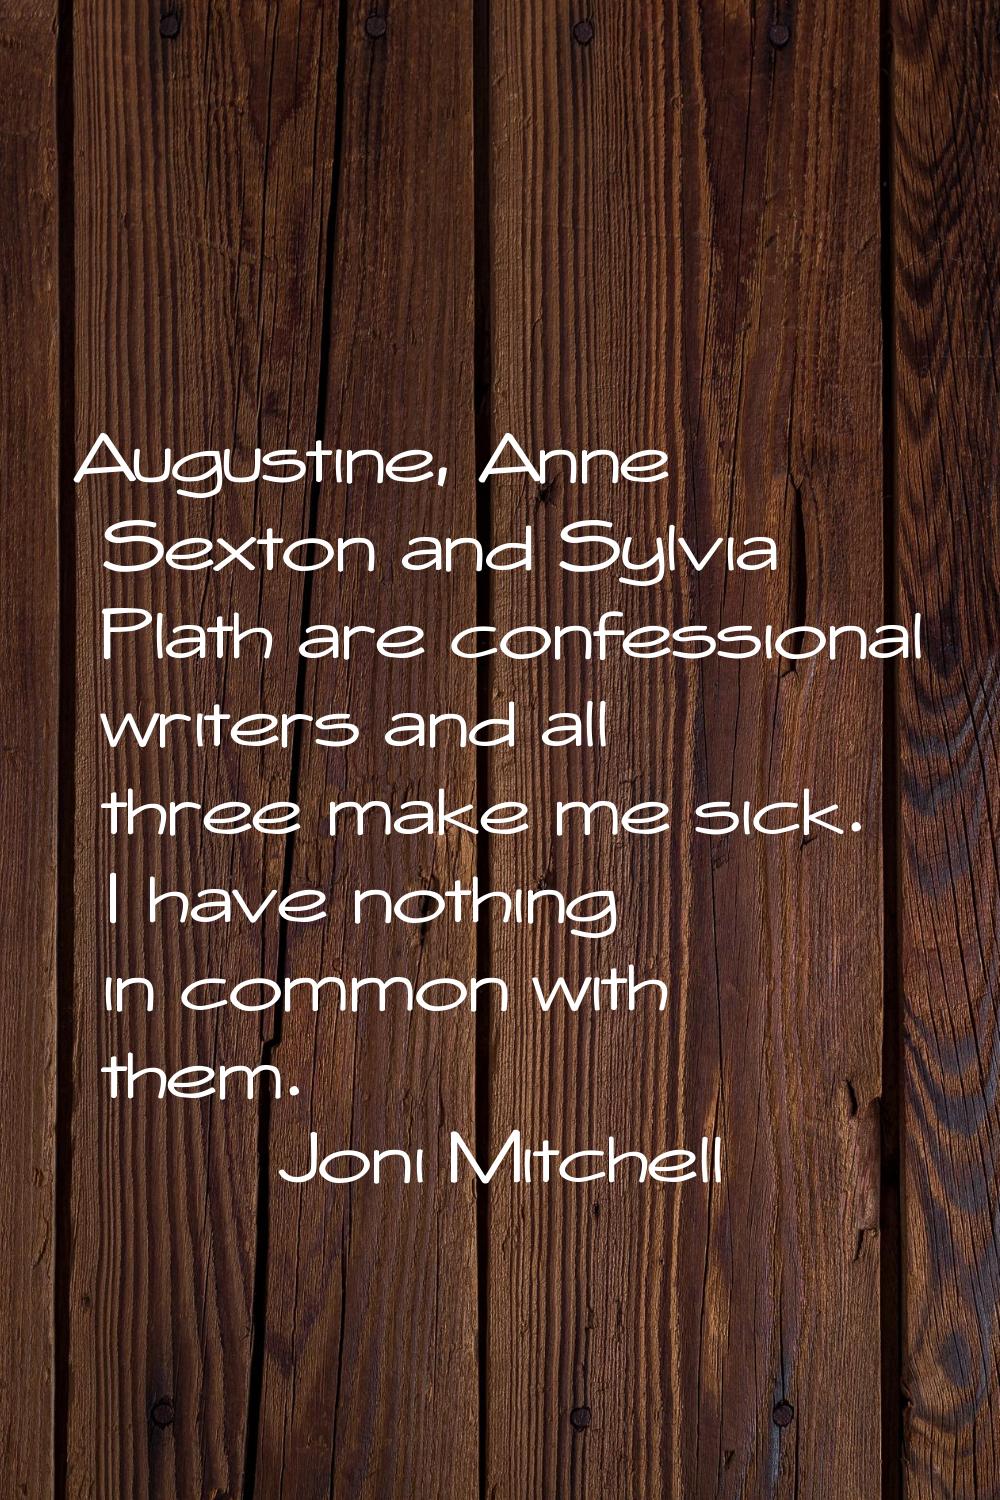 Augustine, Anne Sexton and Sylvia Plath are confessional writers and all three make me sick. I have